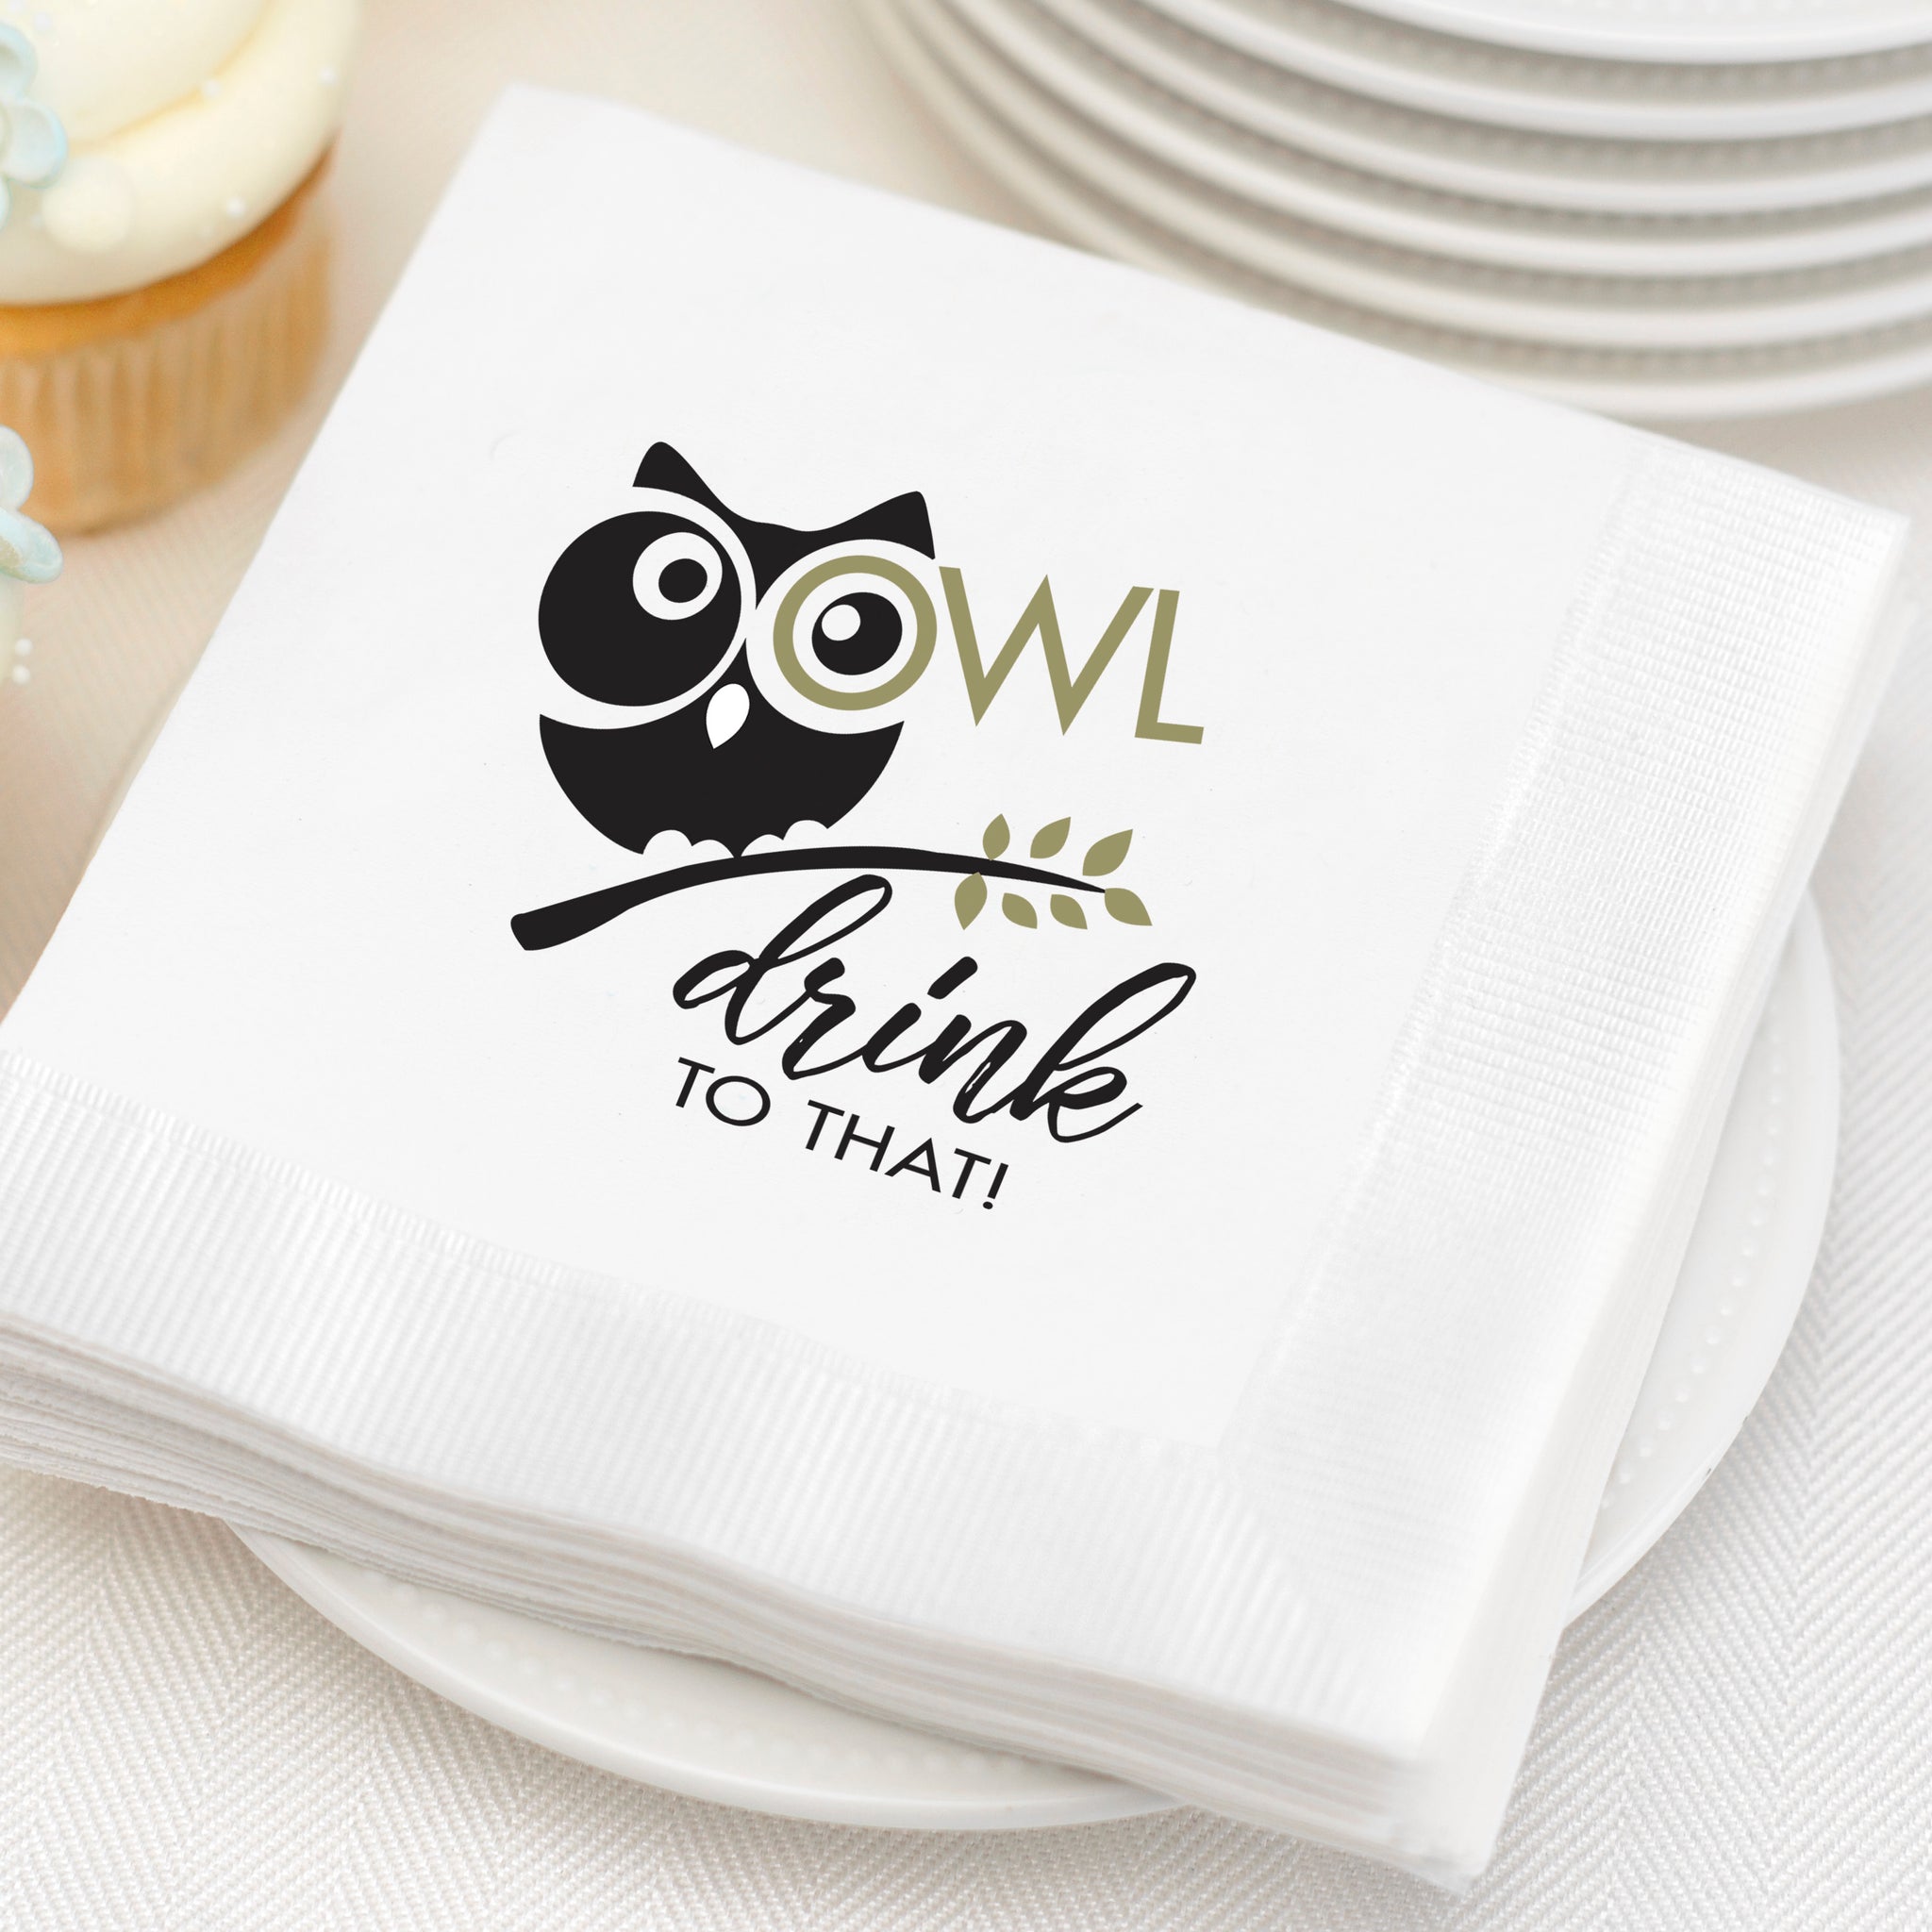 Owl Drink To That Decorative Beverage Cocktail Napkins, Set of 20 by Owl Aisle™